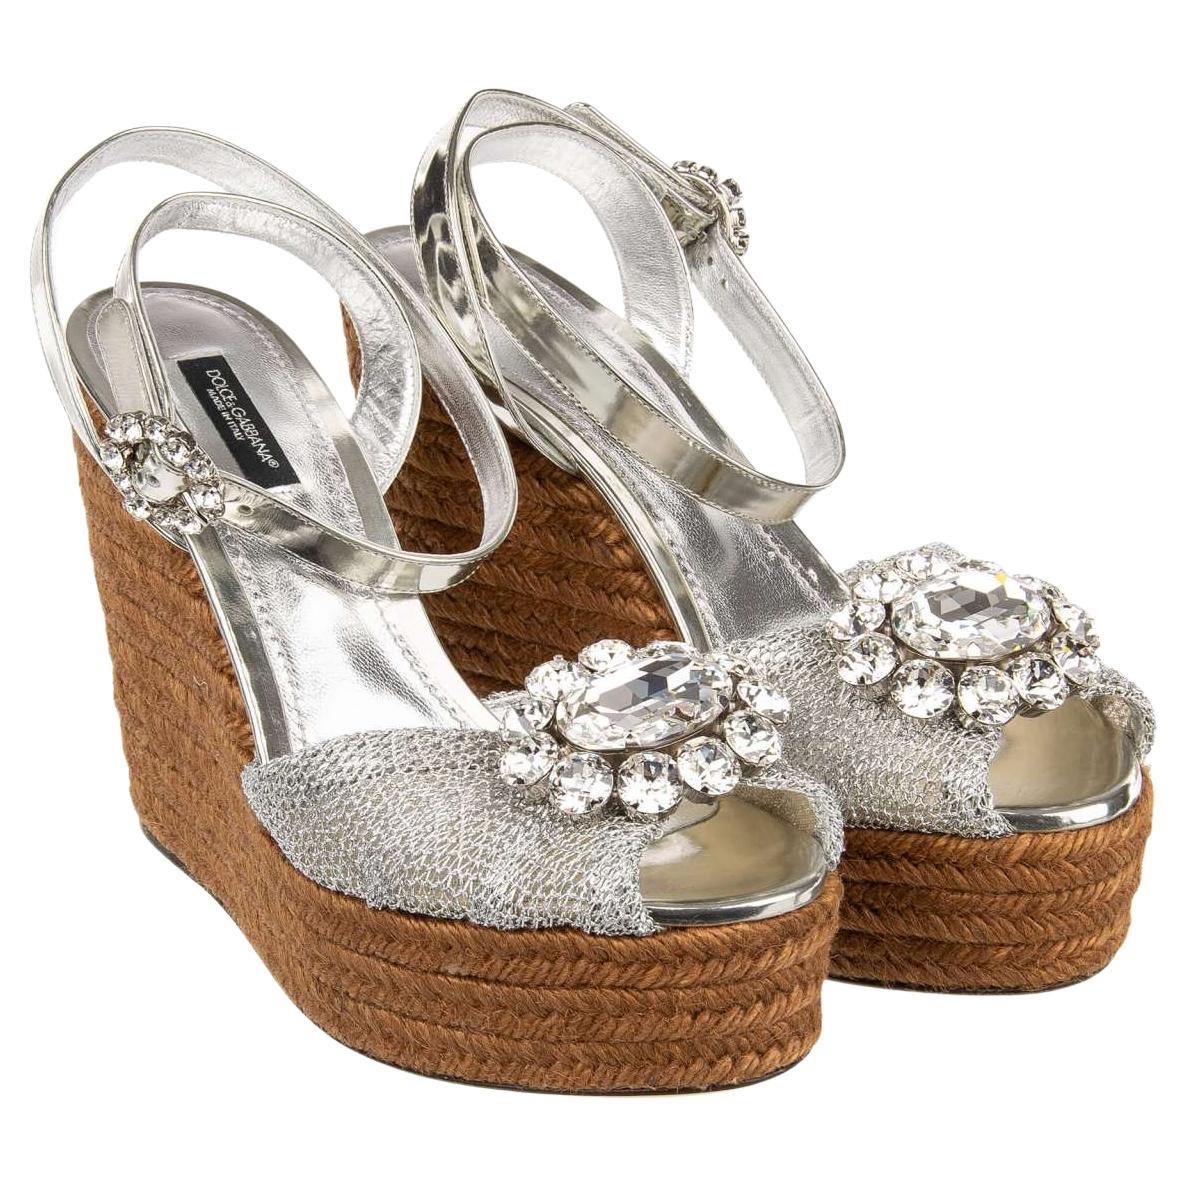 Dolce & Gabbana Plateau Sandals BIANCA with Crystal Brooch Silver EUR 37 For Sale